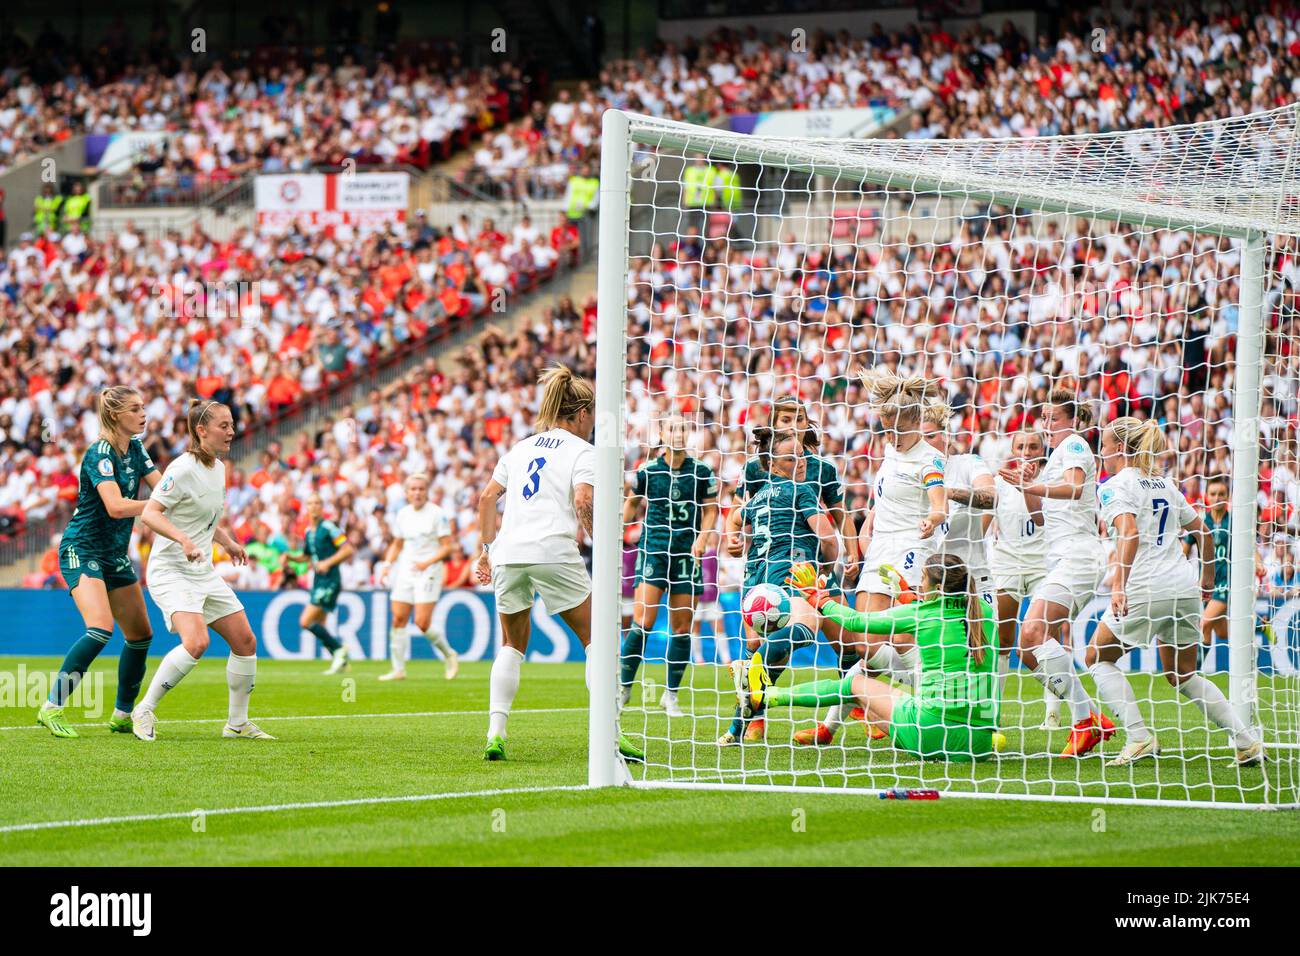 London, UK. 31st July, 2022. Mary Earps (1 England) just manages to clear the ball off the line during the UEFA Womens Euro 2022 Final match between England and Germany at the Wembley Stadium in London, England. (Foto: Sam Mallia/Sports Press Photo/C - ONE HOUR DEADLINE - ONLY ACTIVATE FTP IF IMAGES LESS THAN ONE HOUR OLD - Alamy) Credit: SPP Sport Press Photo. /Alamy Live News Stock Photo